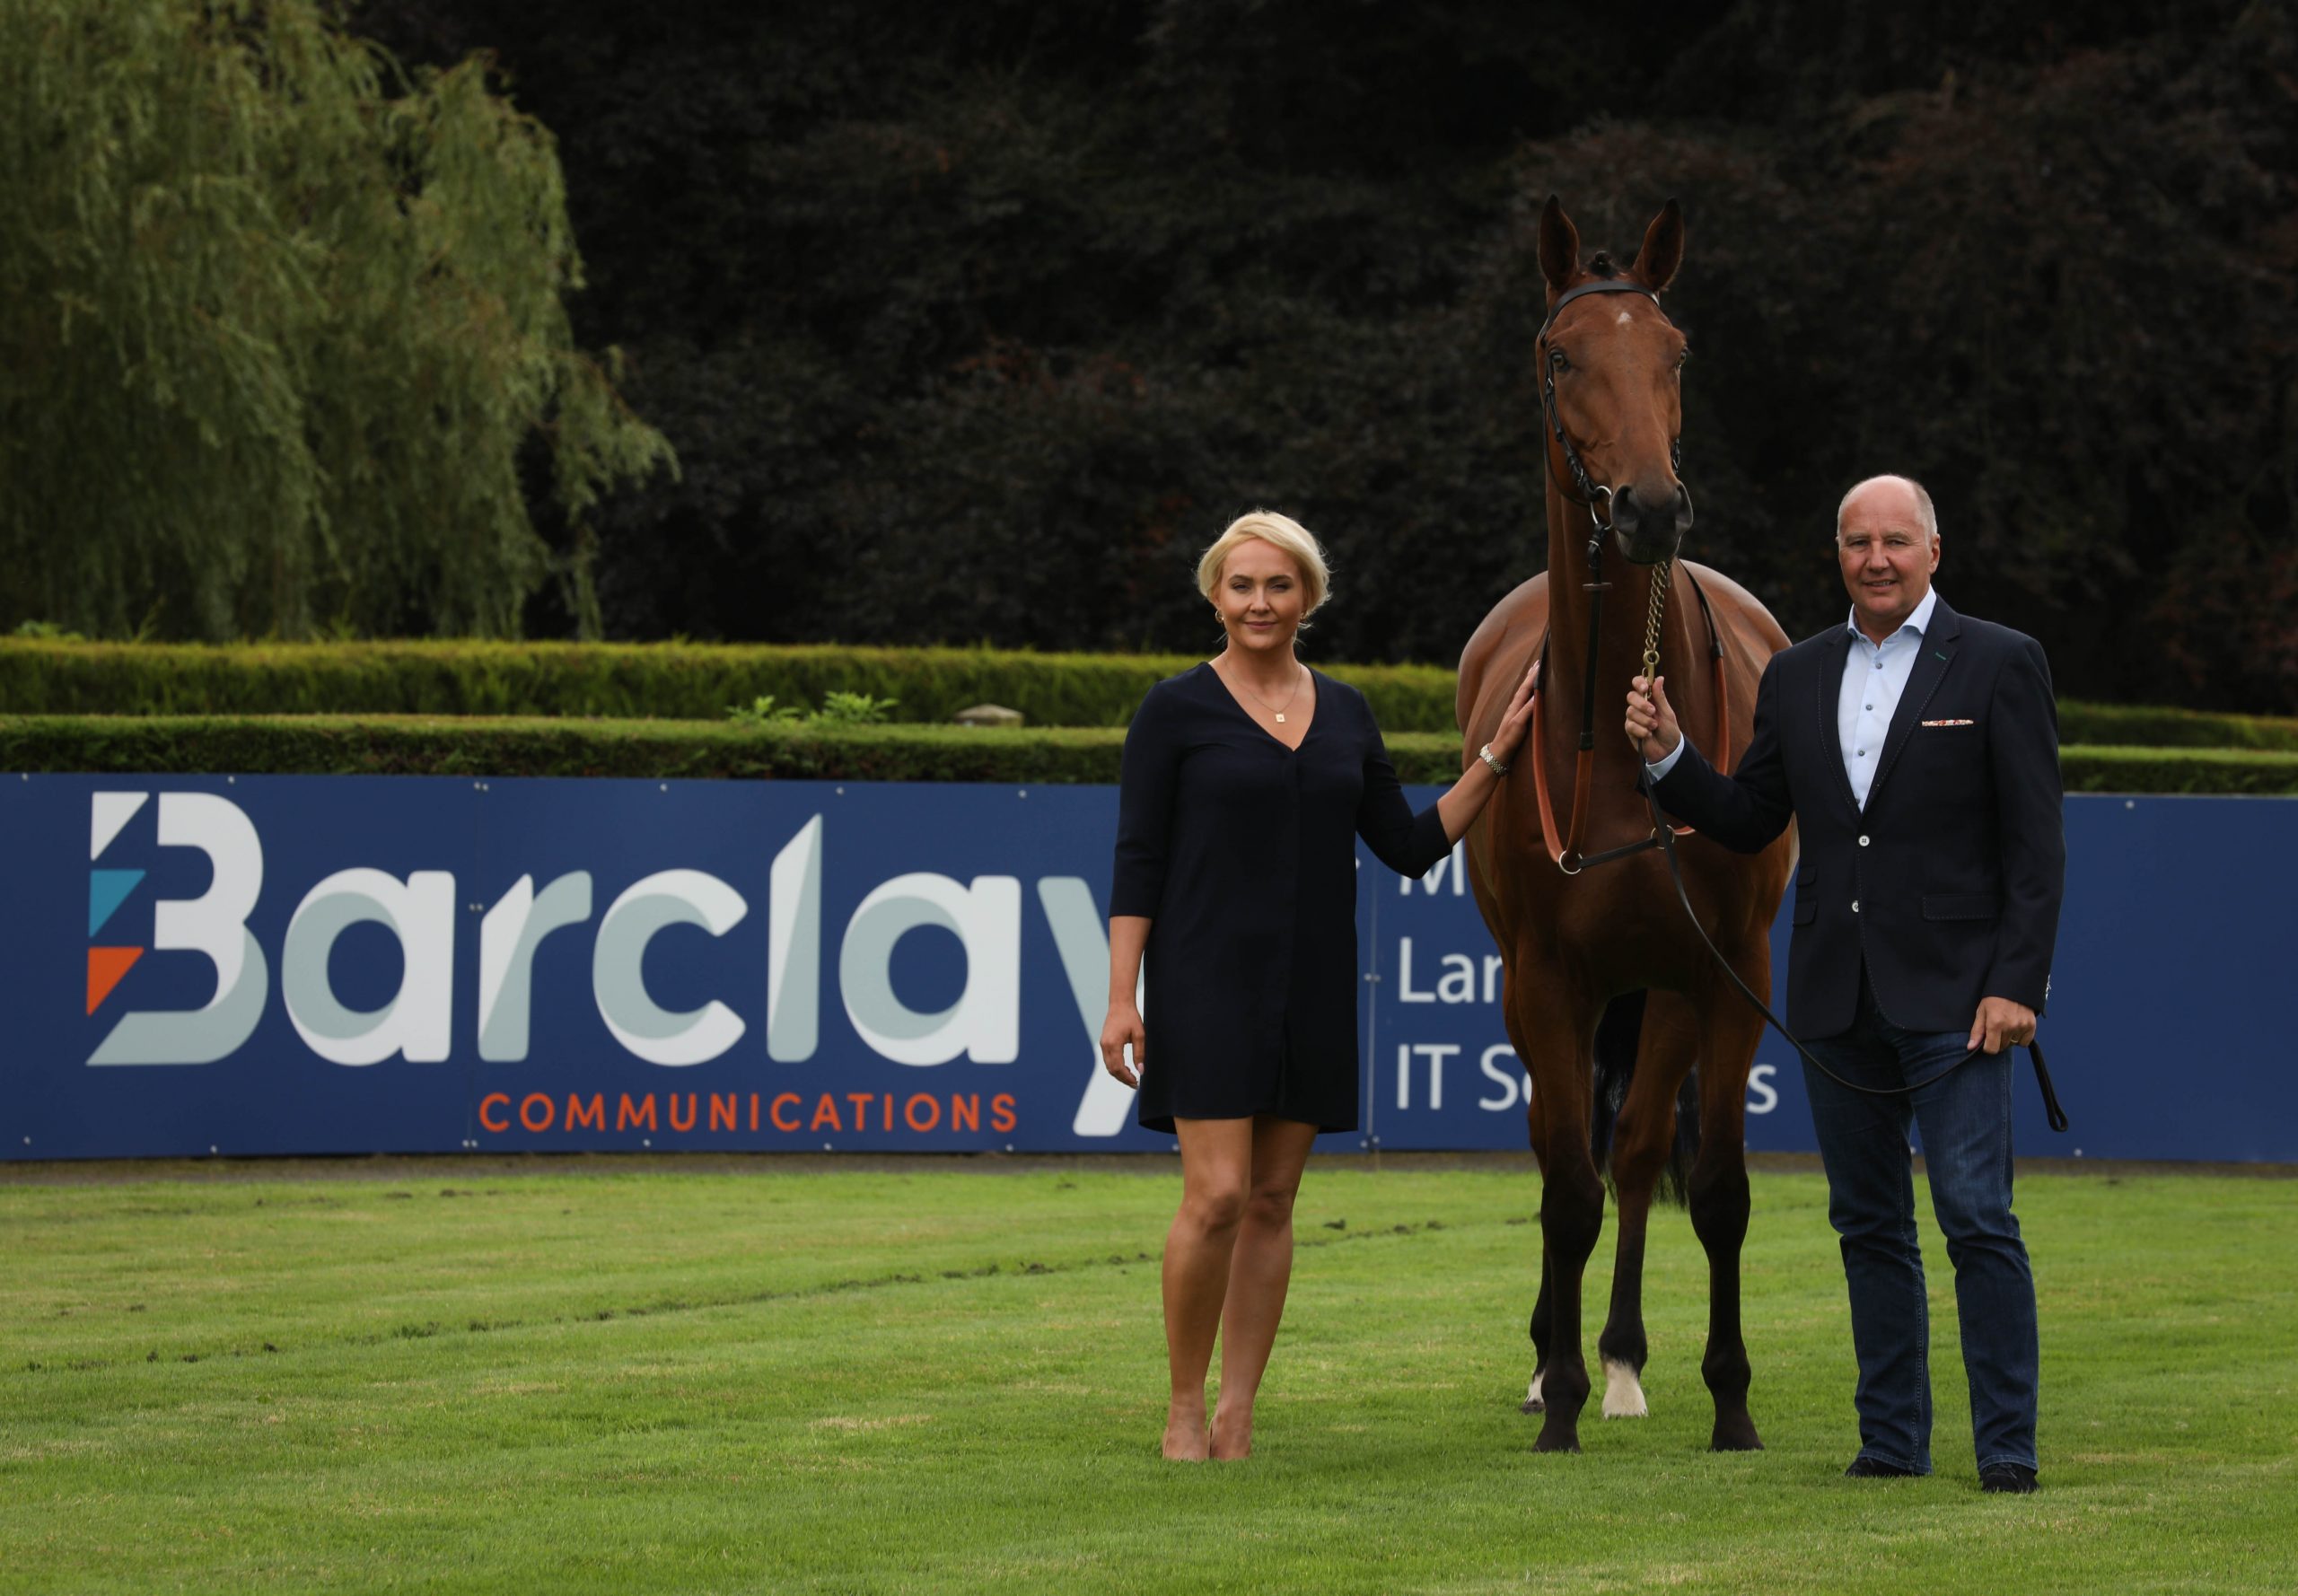 Northern Ireland’s fastest growing telecommunications company, Barclay Communications, sponsors Down Royal hospitality suite in new £45k contract